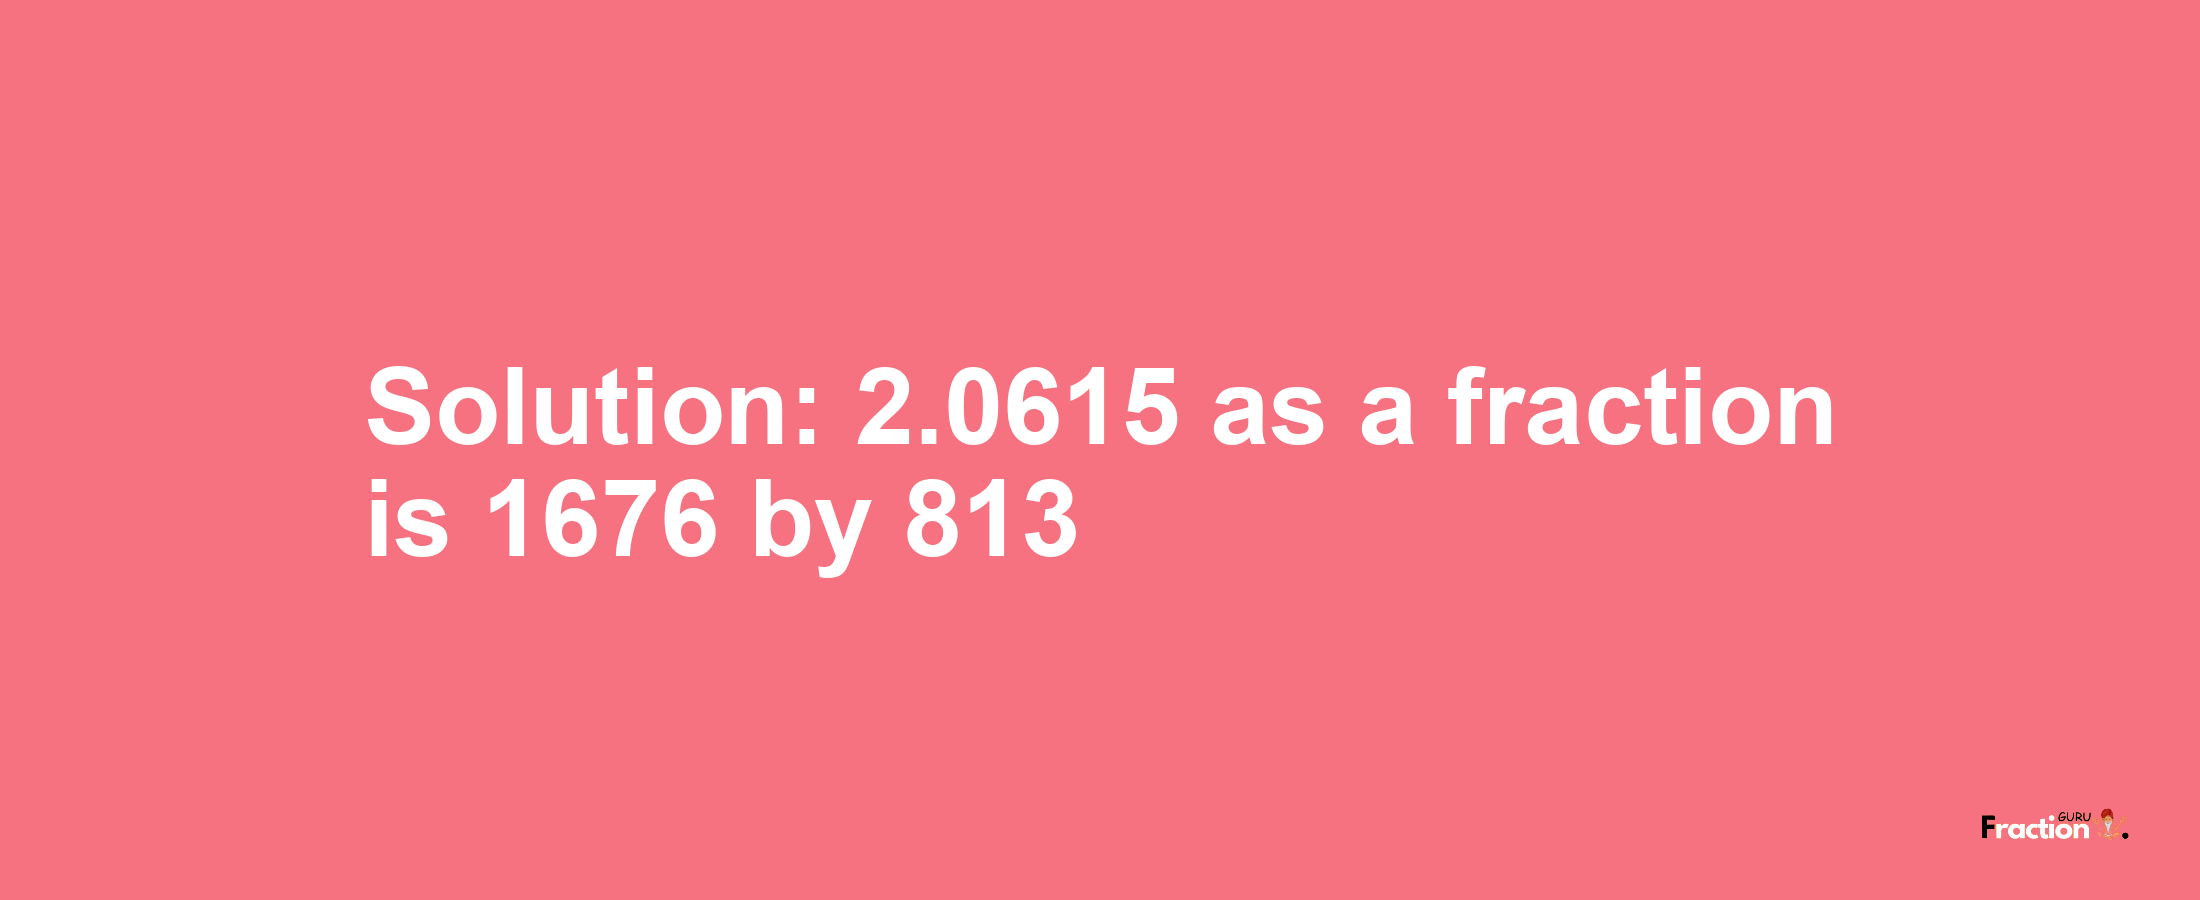 Solution:2.0615 as a fraction is 1676/813